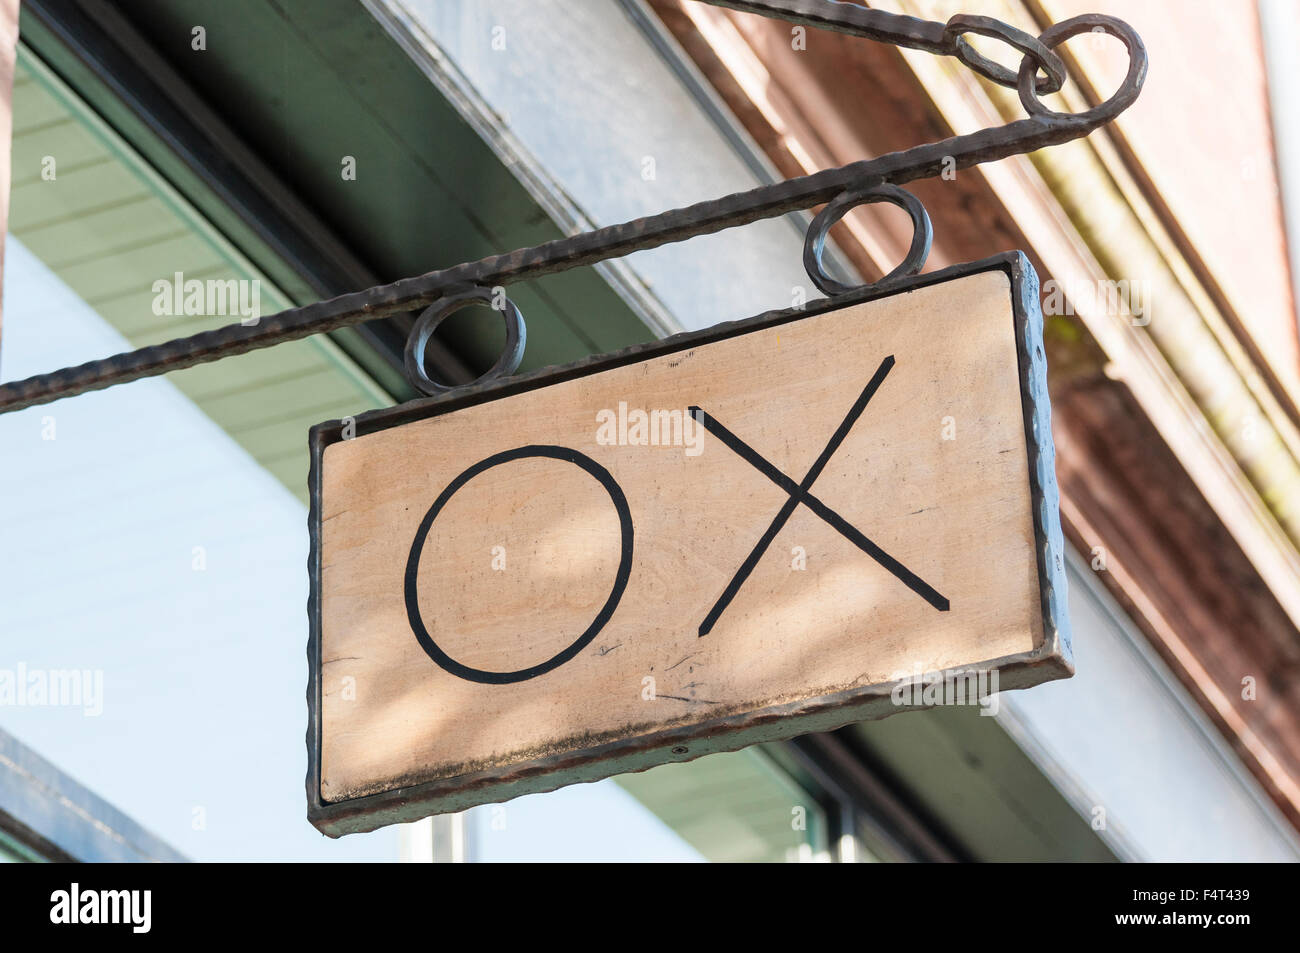 Ox Restaurant, Belfast.  Owned by Stephen Toman and Alain Kerloc'h, it has been awarded a Michelin Star. Stock Photo